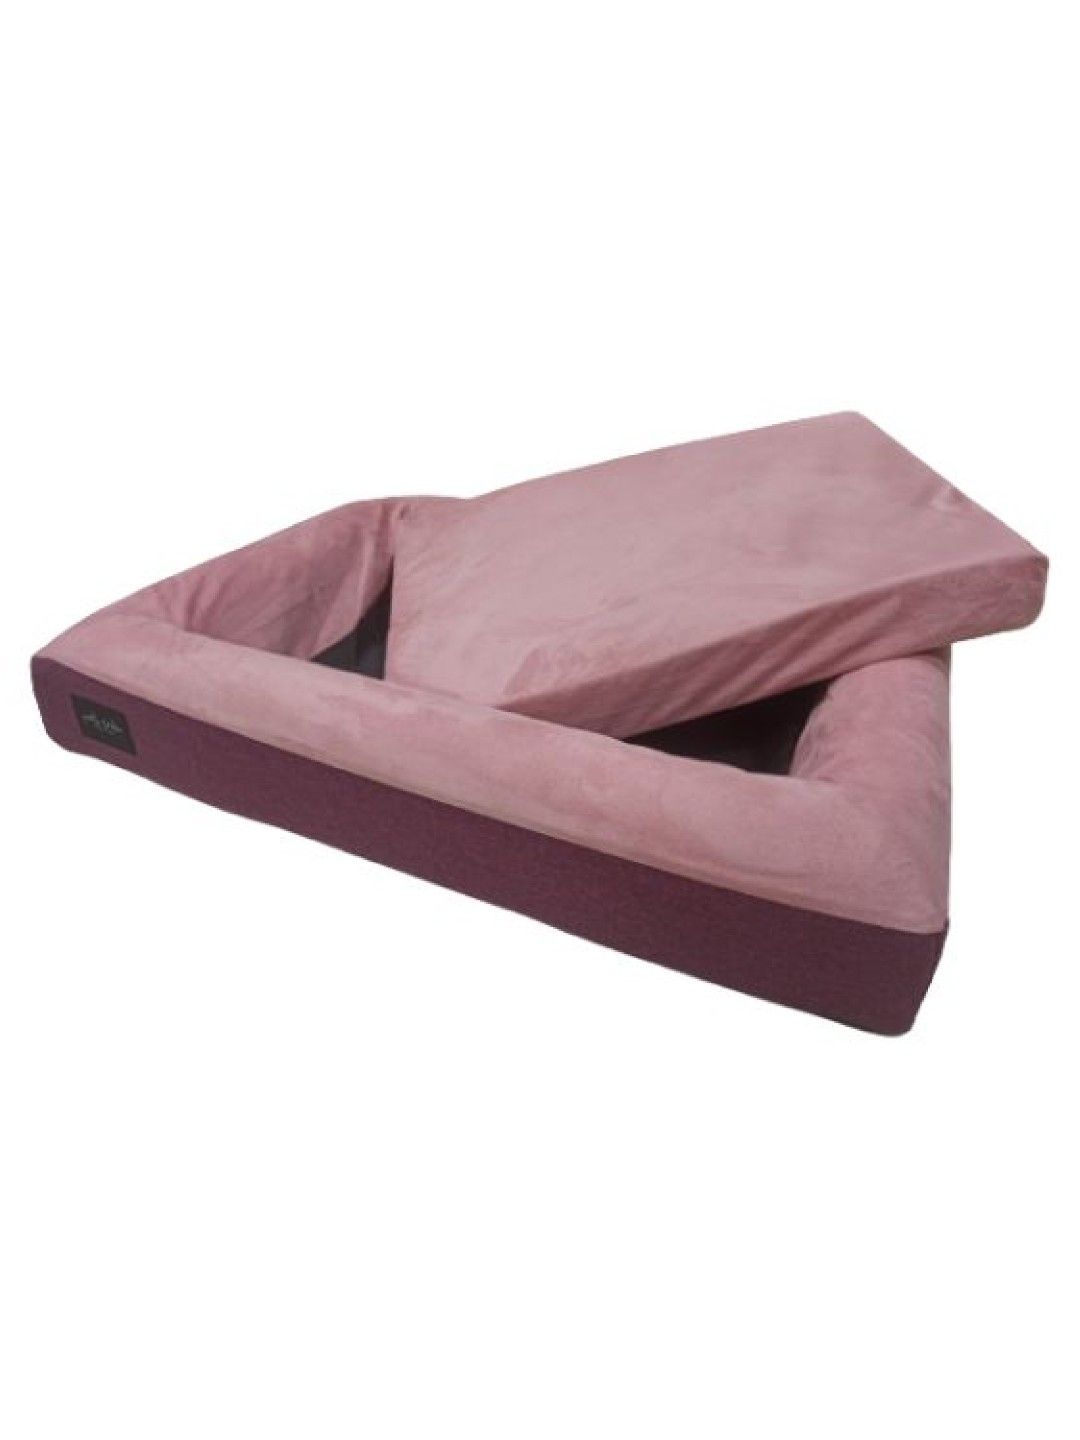 Petto Beddo Pet Bed (Pink- Image 2)